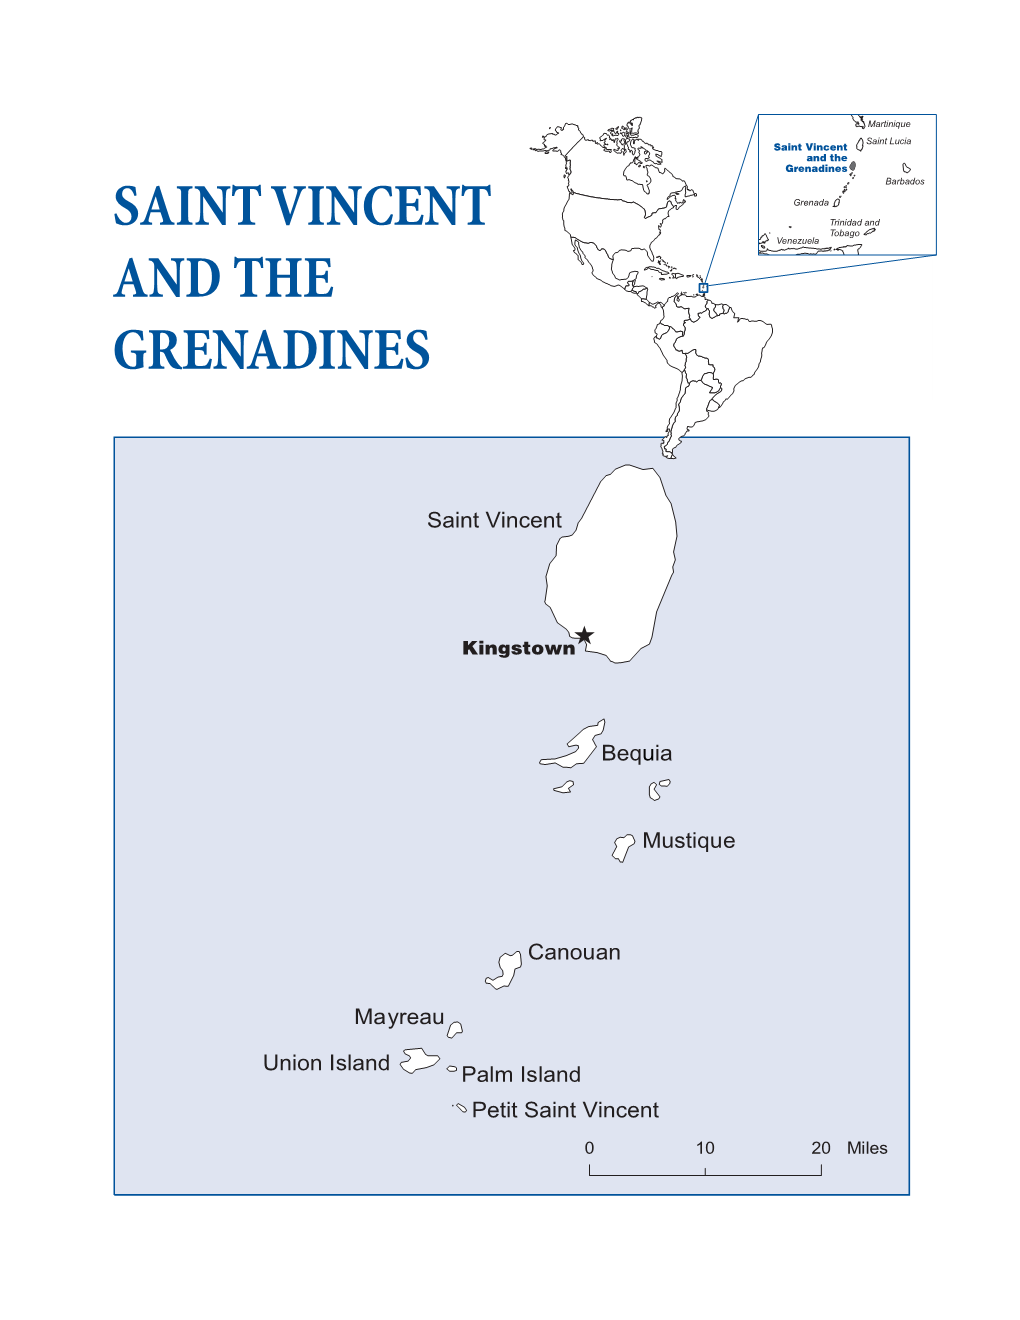 Saint Vincent and the Grenadines Country Profile